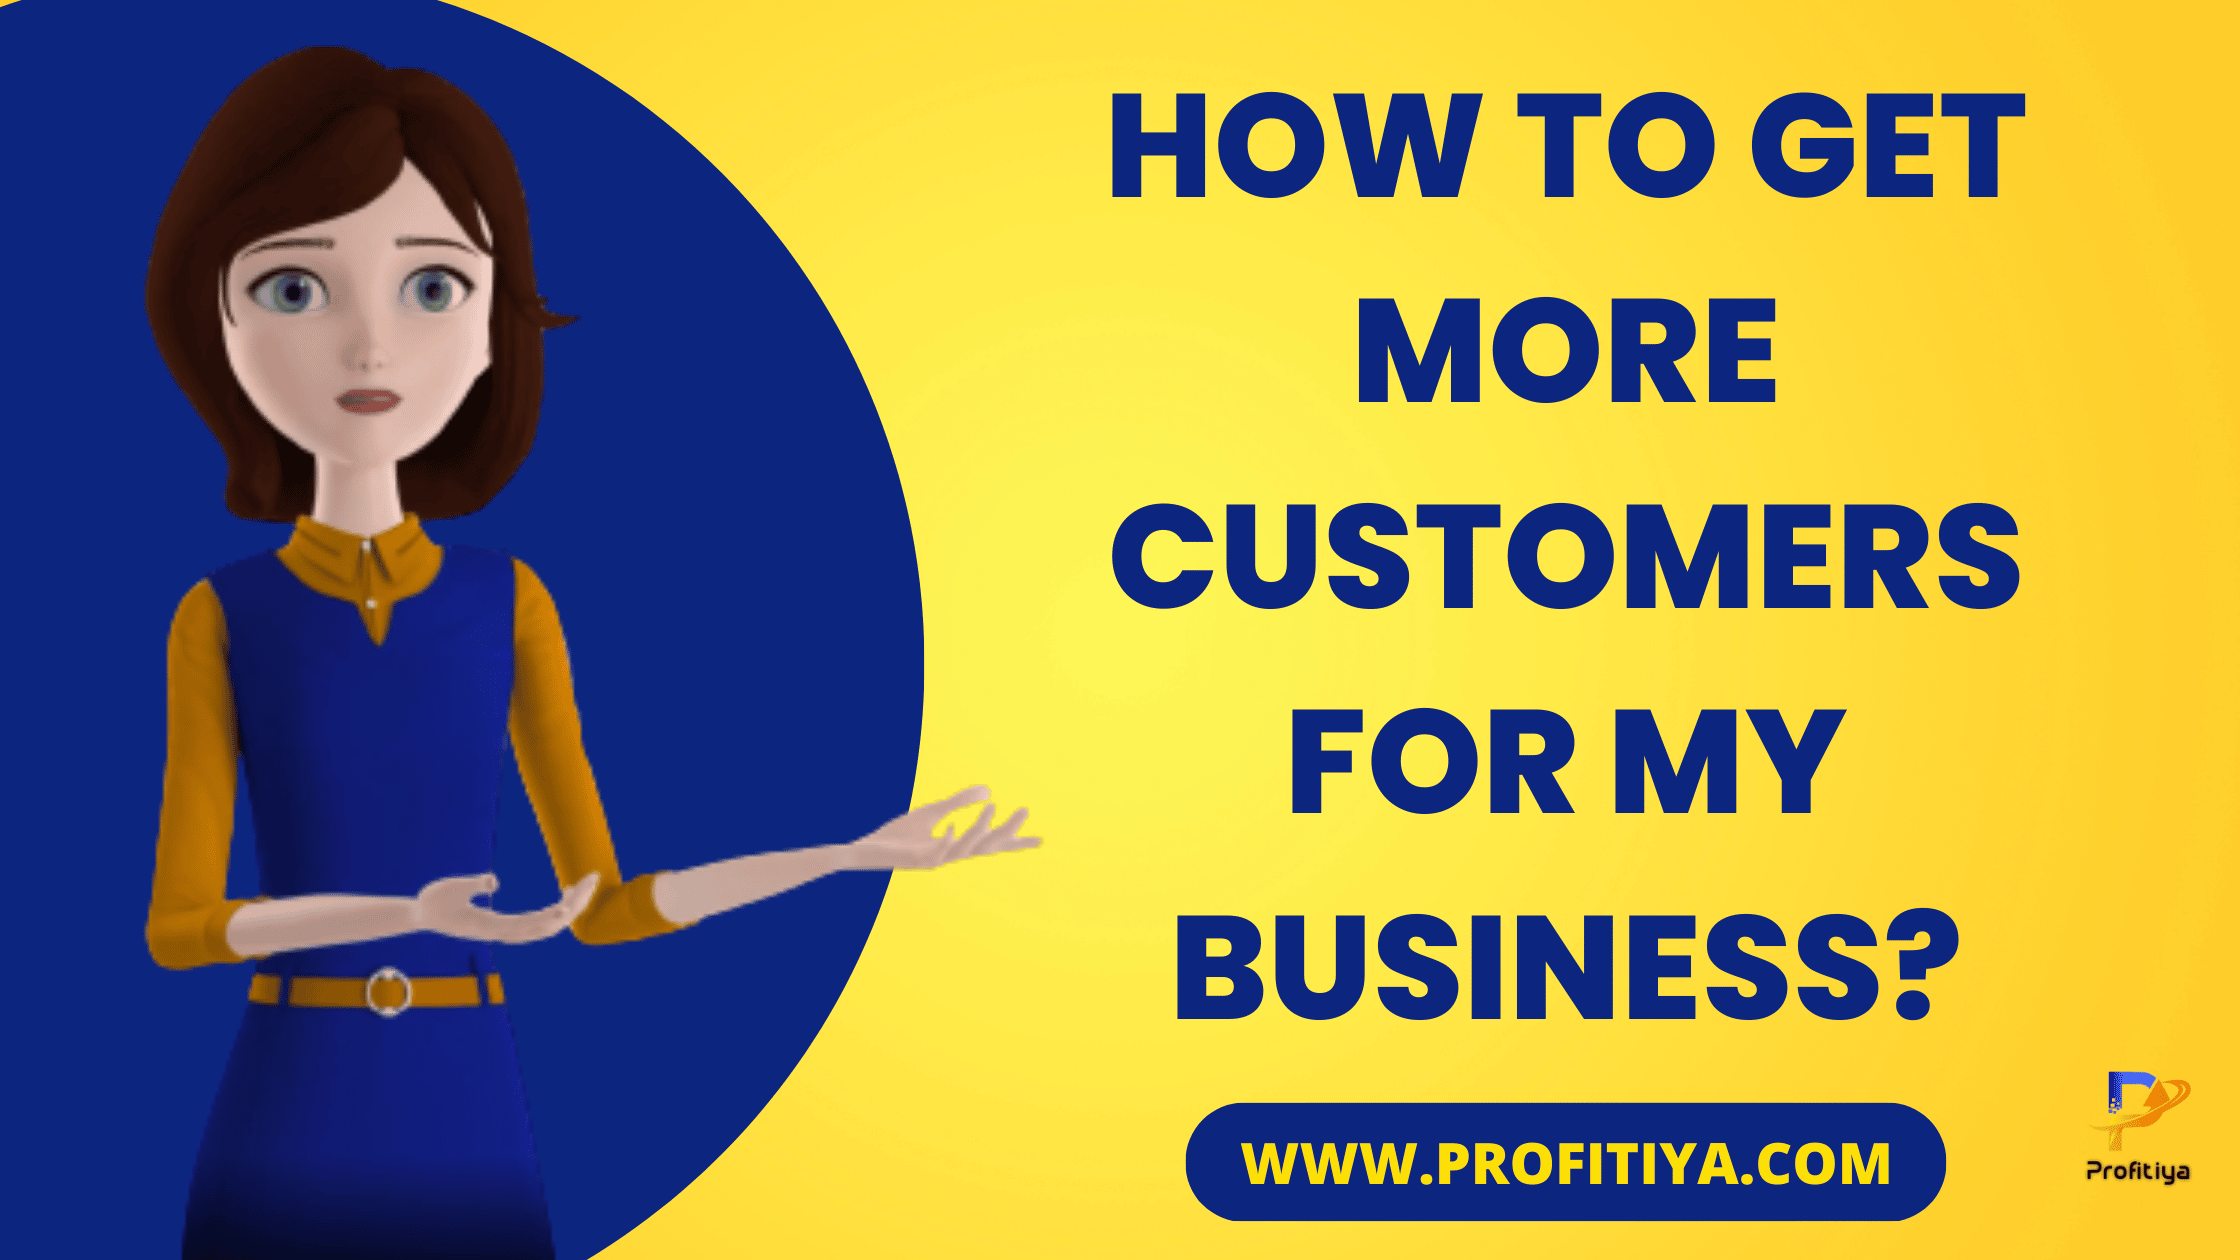 How To Get More Customers For My Business